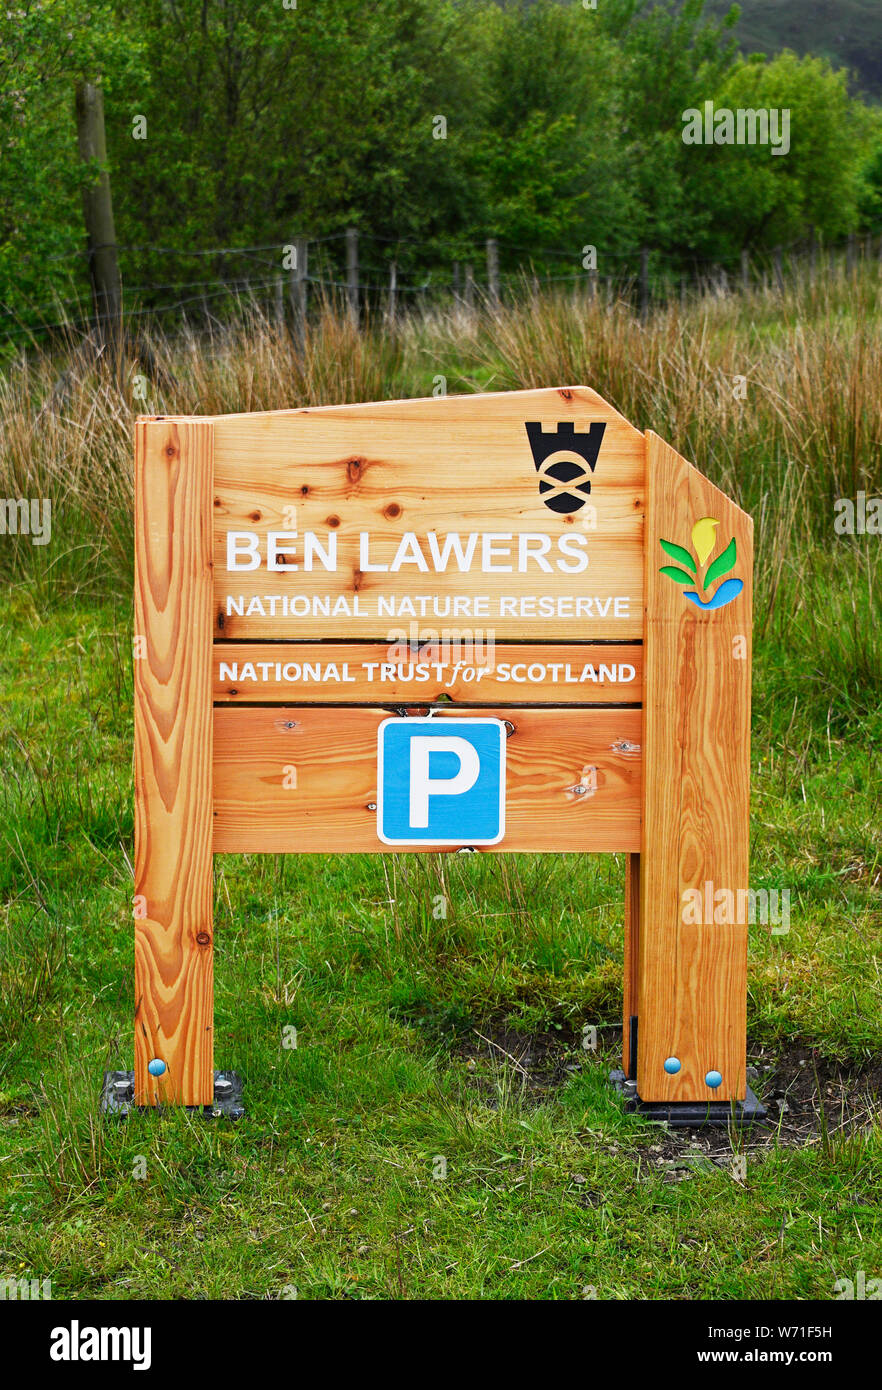 Signboard. Ben Lawers National National Nature Reserve. National Trust for Scotland. Perth and Kinross, Scotland, United Kingdom, Europe. Stock Photo